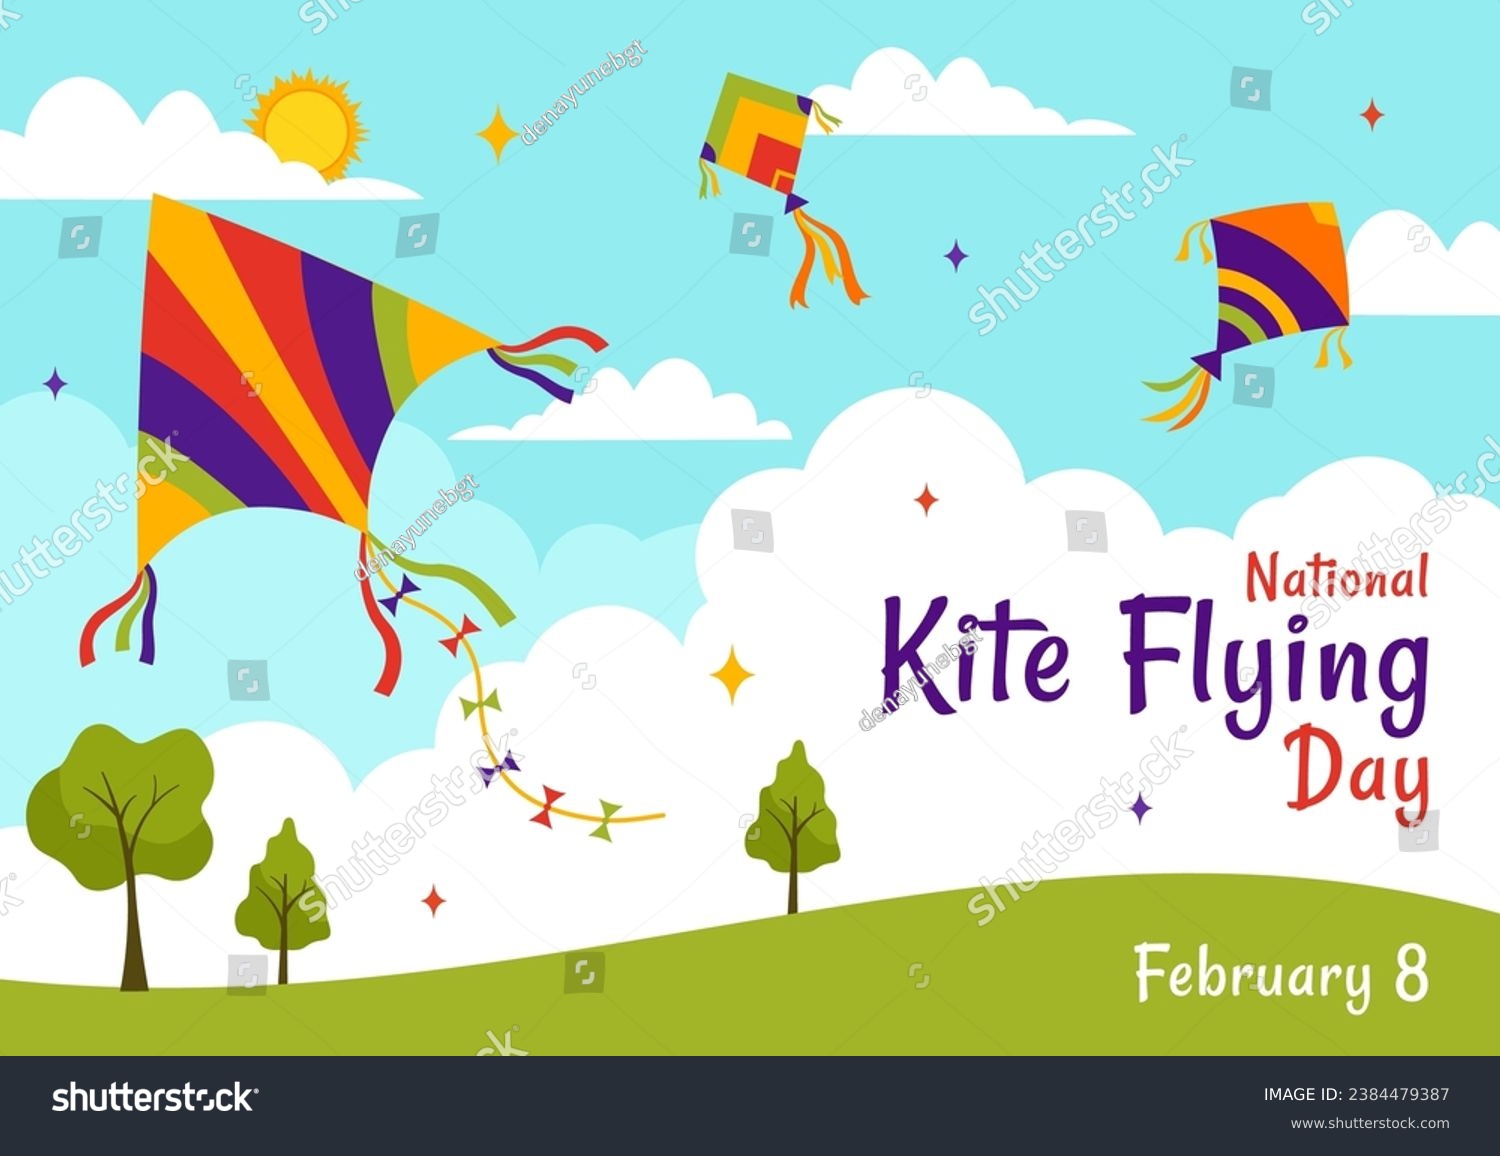 SVG of National Kite Flying Day Vector Illustration on February 8 of Sunny Sky Background in Summer Leisure Activity in Flat Cartoon Background Design svg